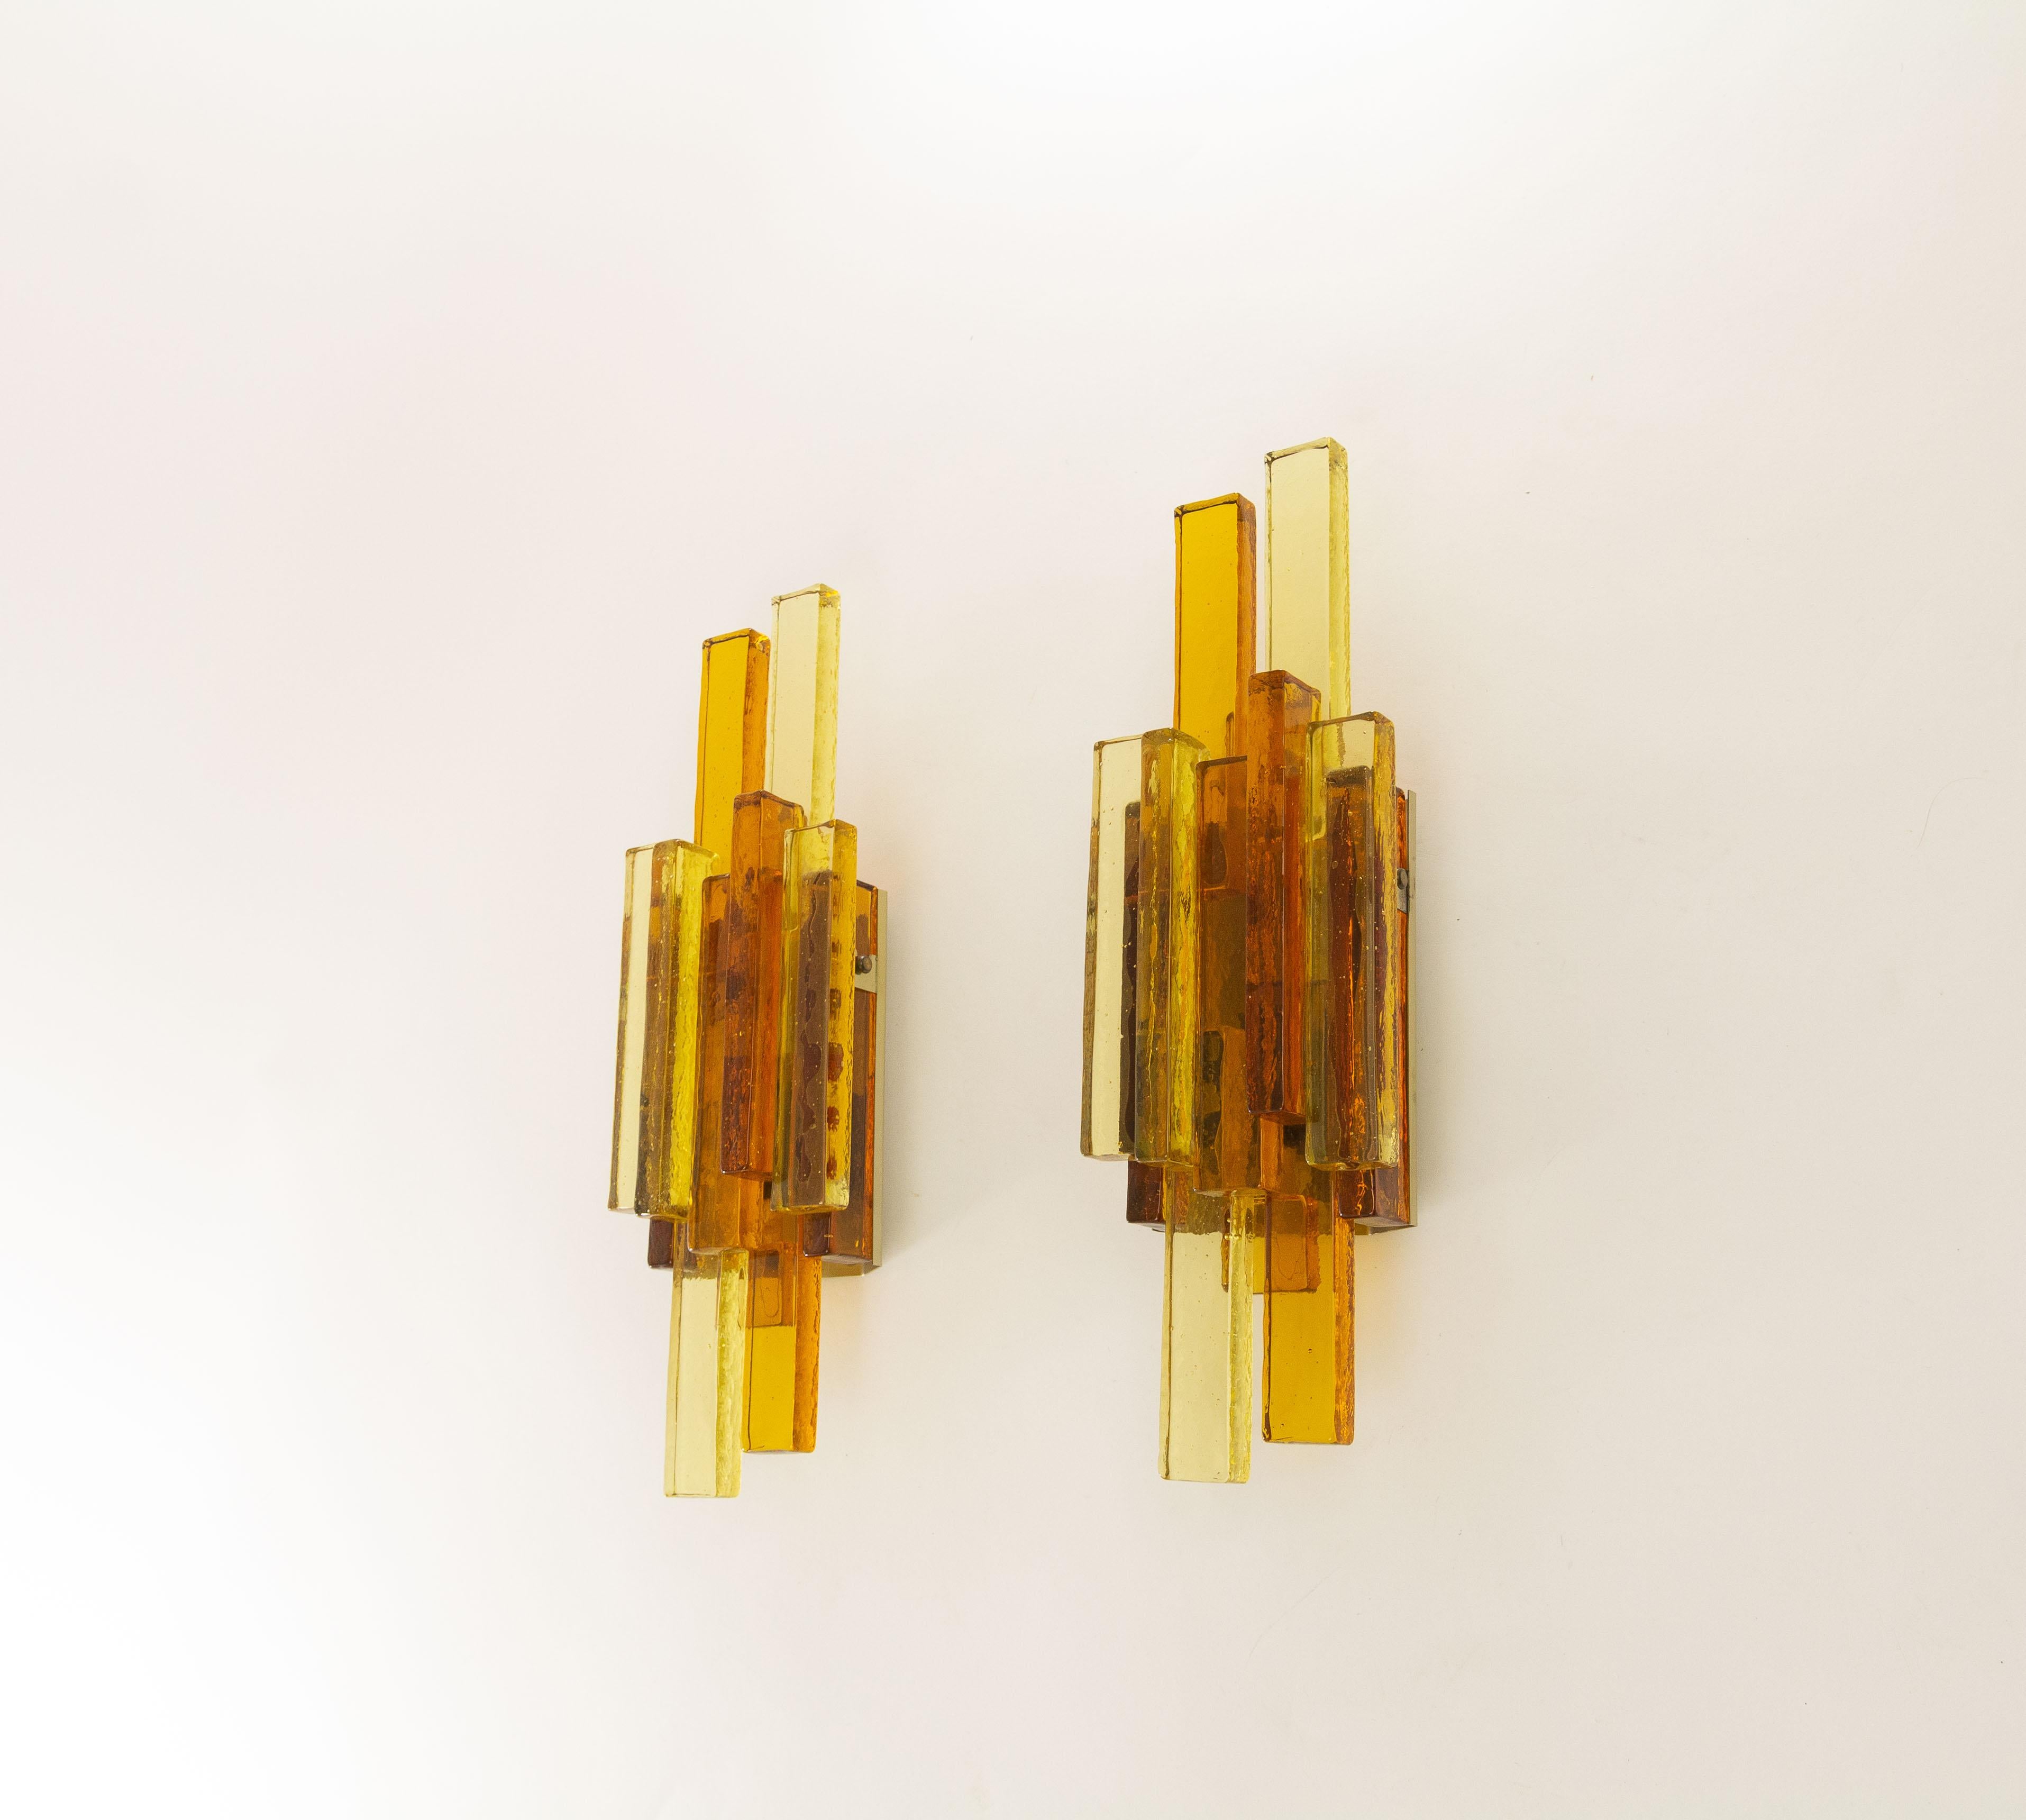 A pair of glass wall lamps No. 5104 designed by Svend Aage Holm Sørensen for his own company, Holm Sørensen & Co.

Beautifully designed with golden and amber colored glass, granting the lamps a classy appearance. The original company branding is